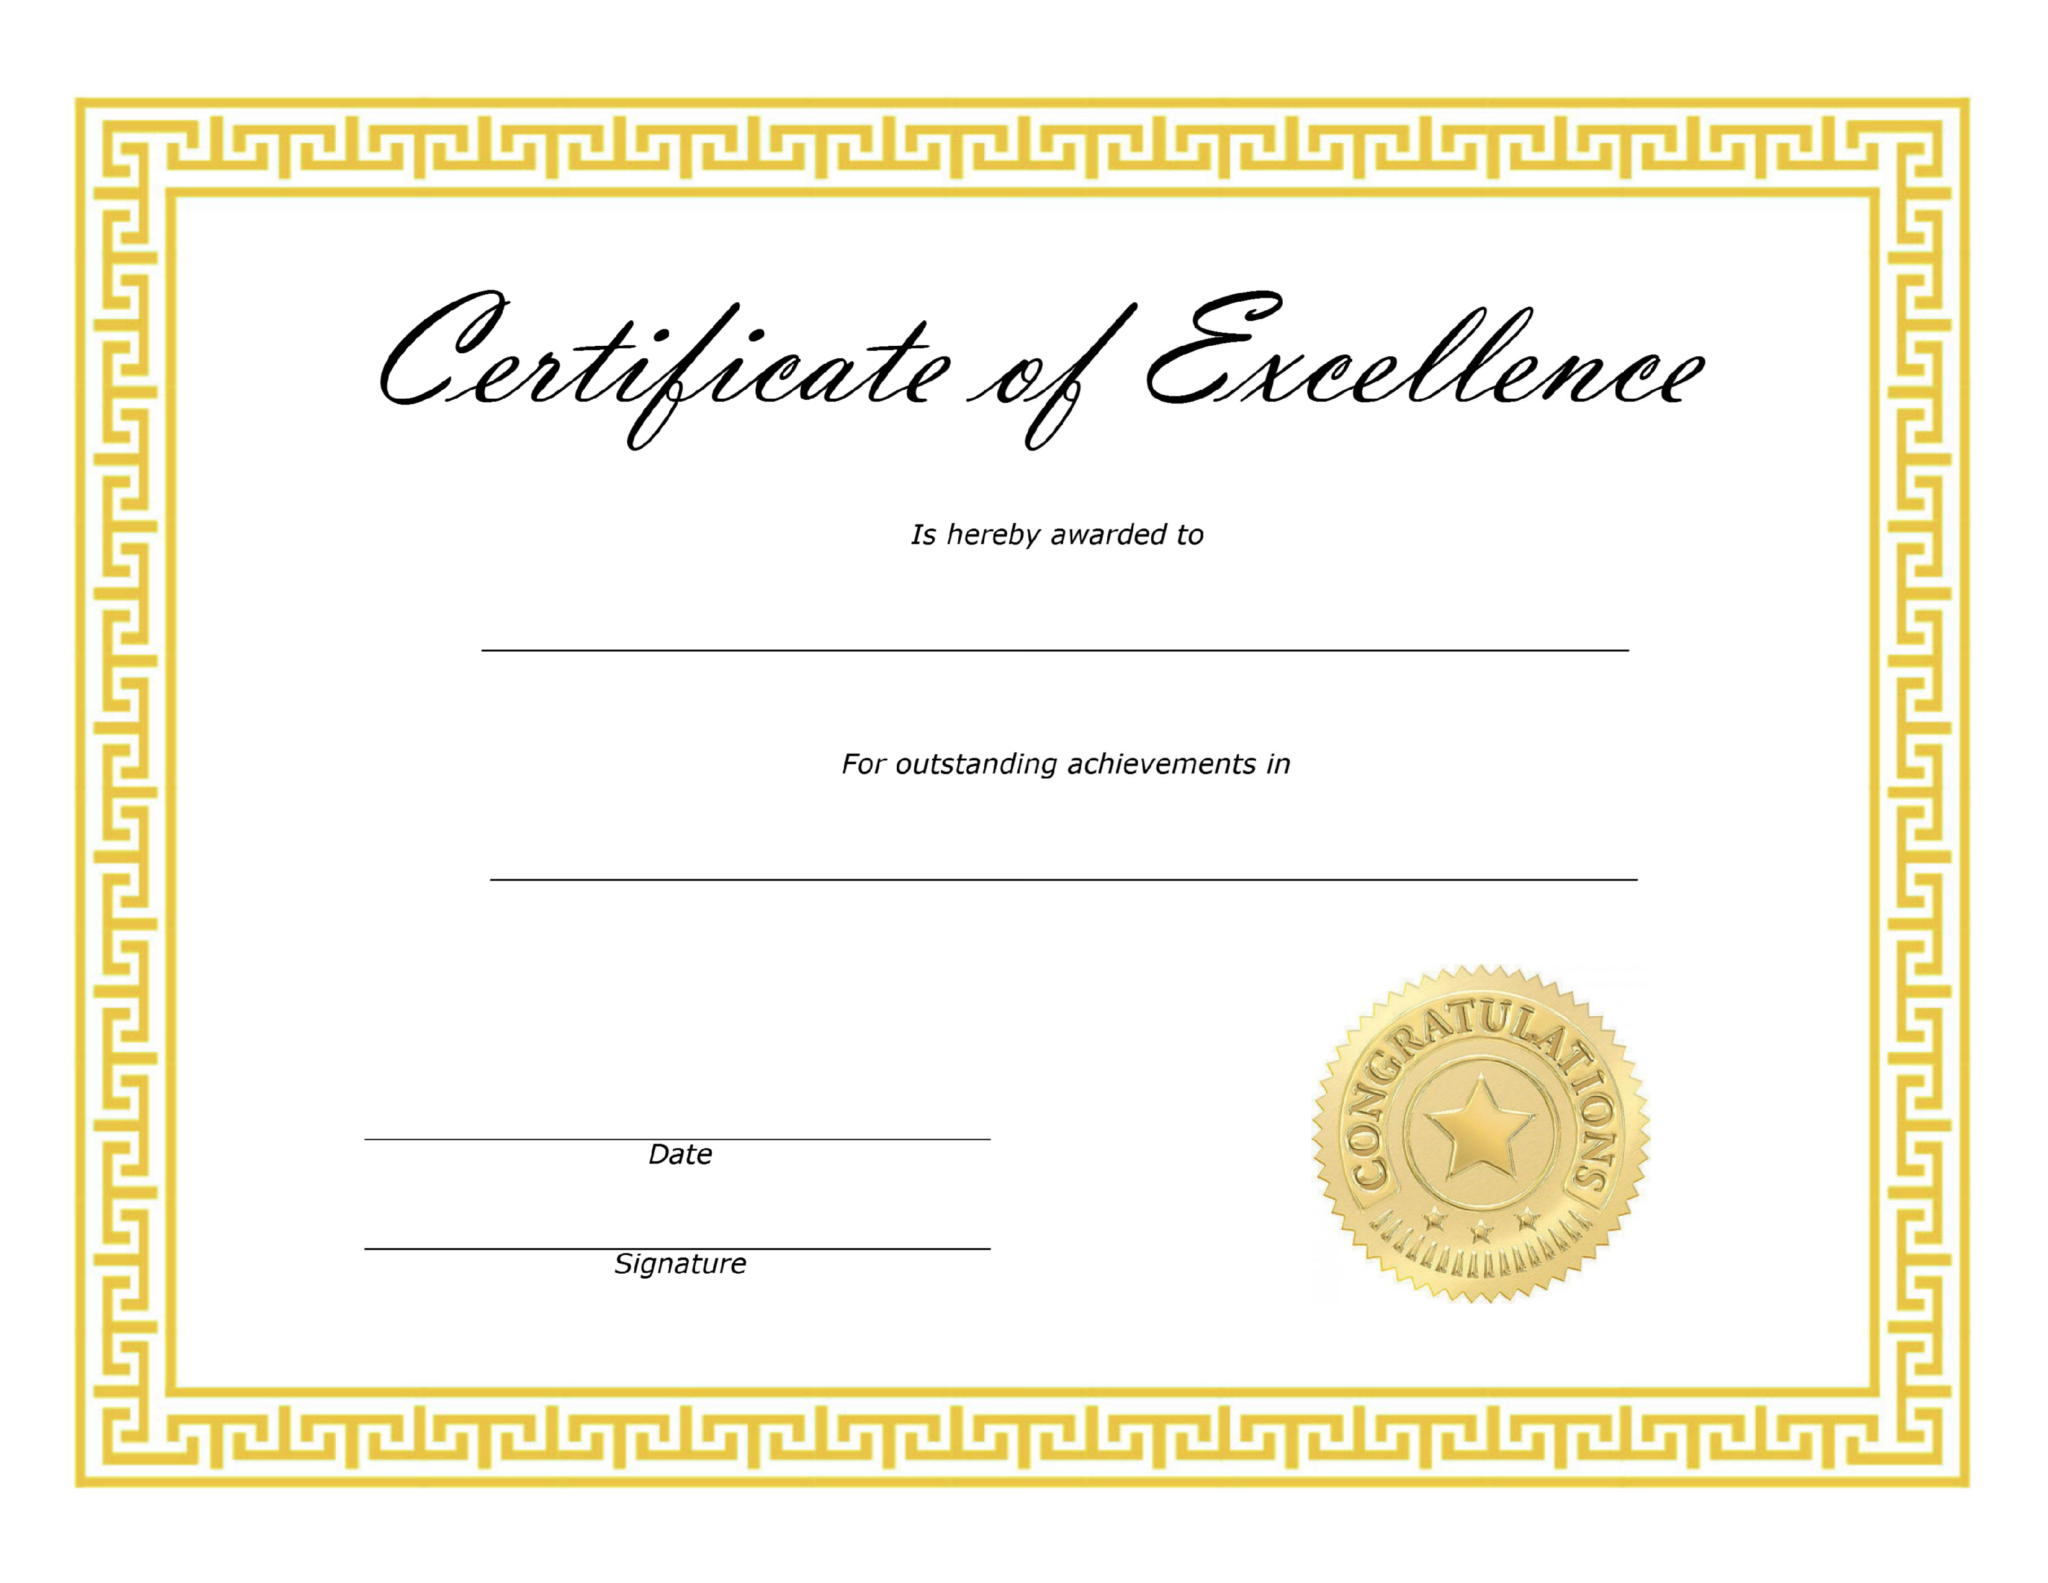 award-of-excellence-certificate-template-professional-template